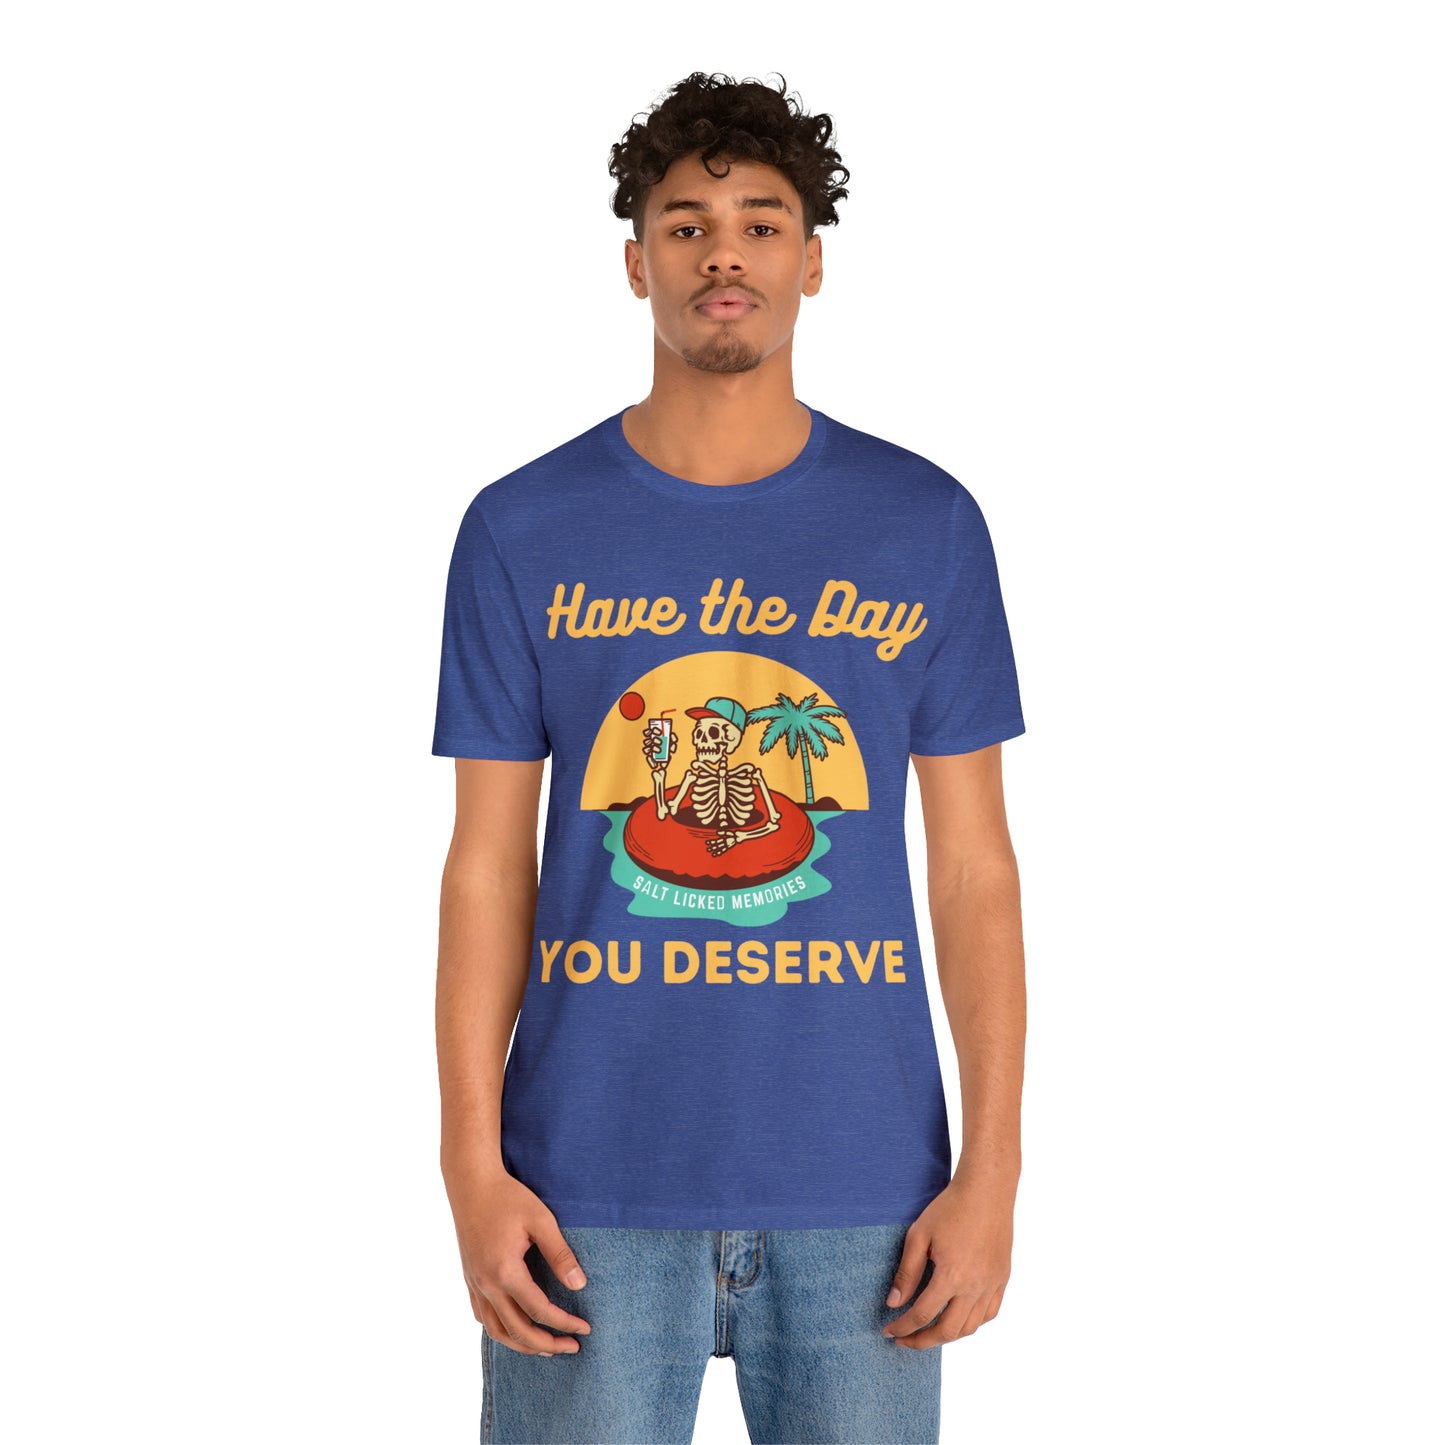 Have the Day You Deserve Shirt, Inspirational Graphic Tee, Motivational Tee, Positive Vibes Shirt, Trendy shirt and Eye Catching shirt